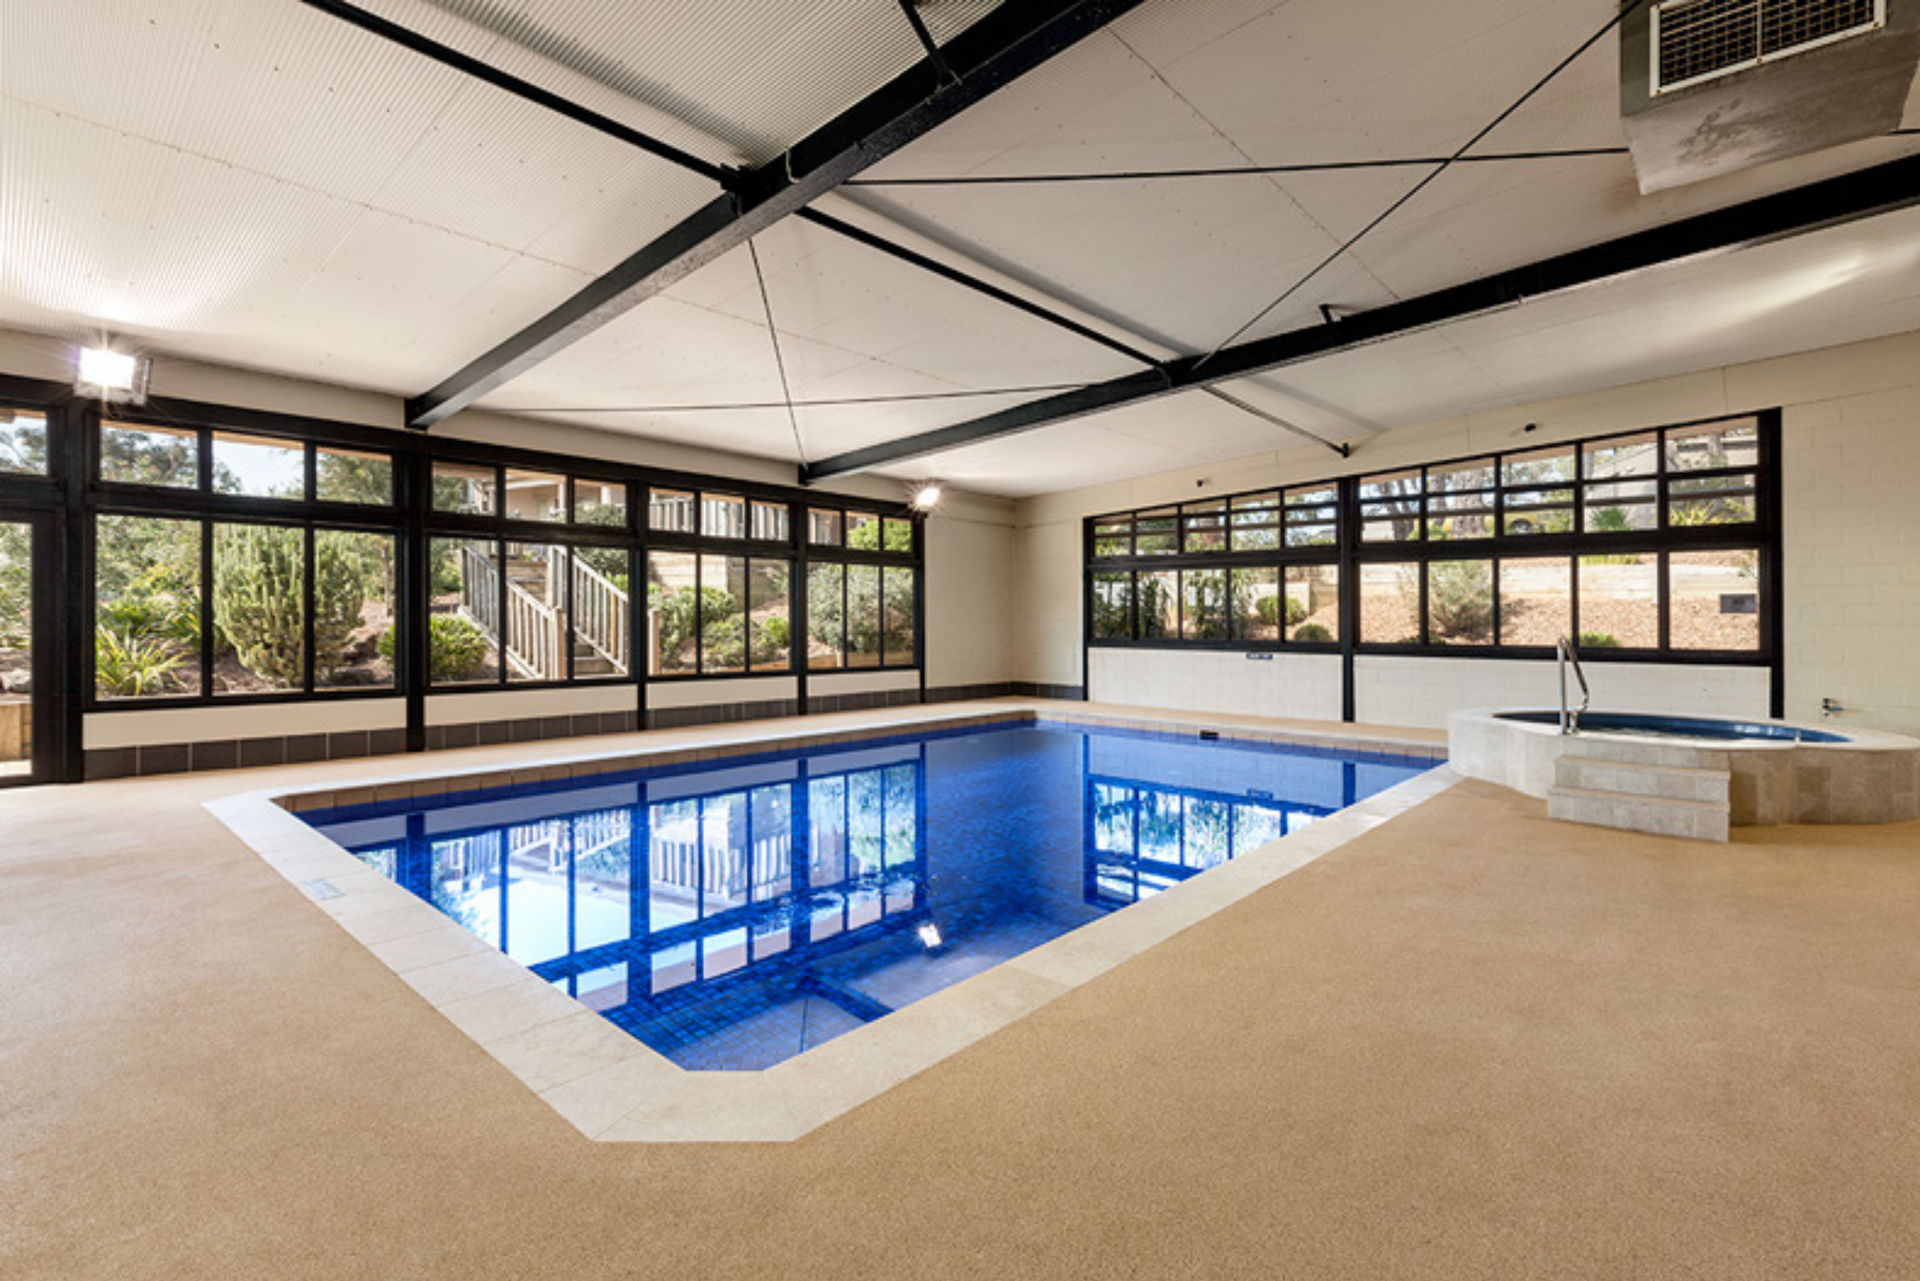 A large indoor swimming pool with lots of windows